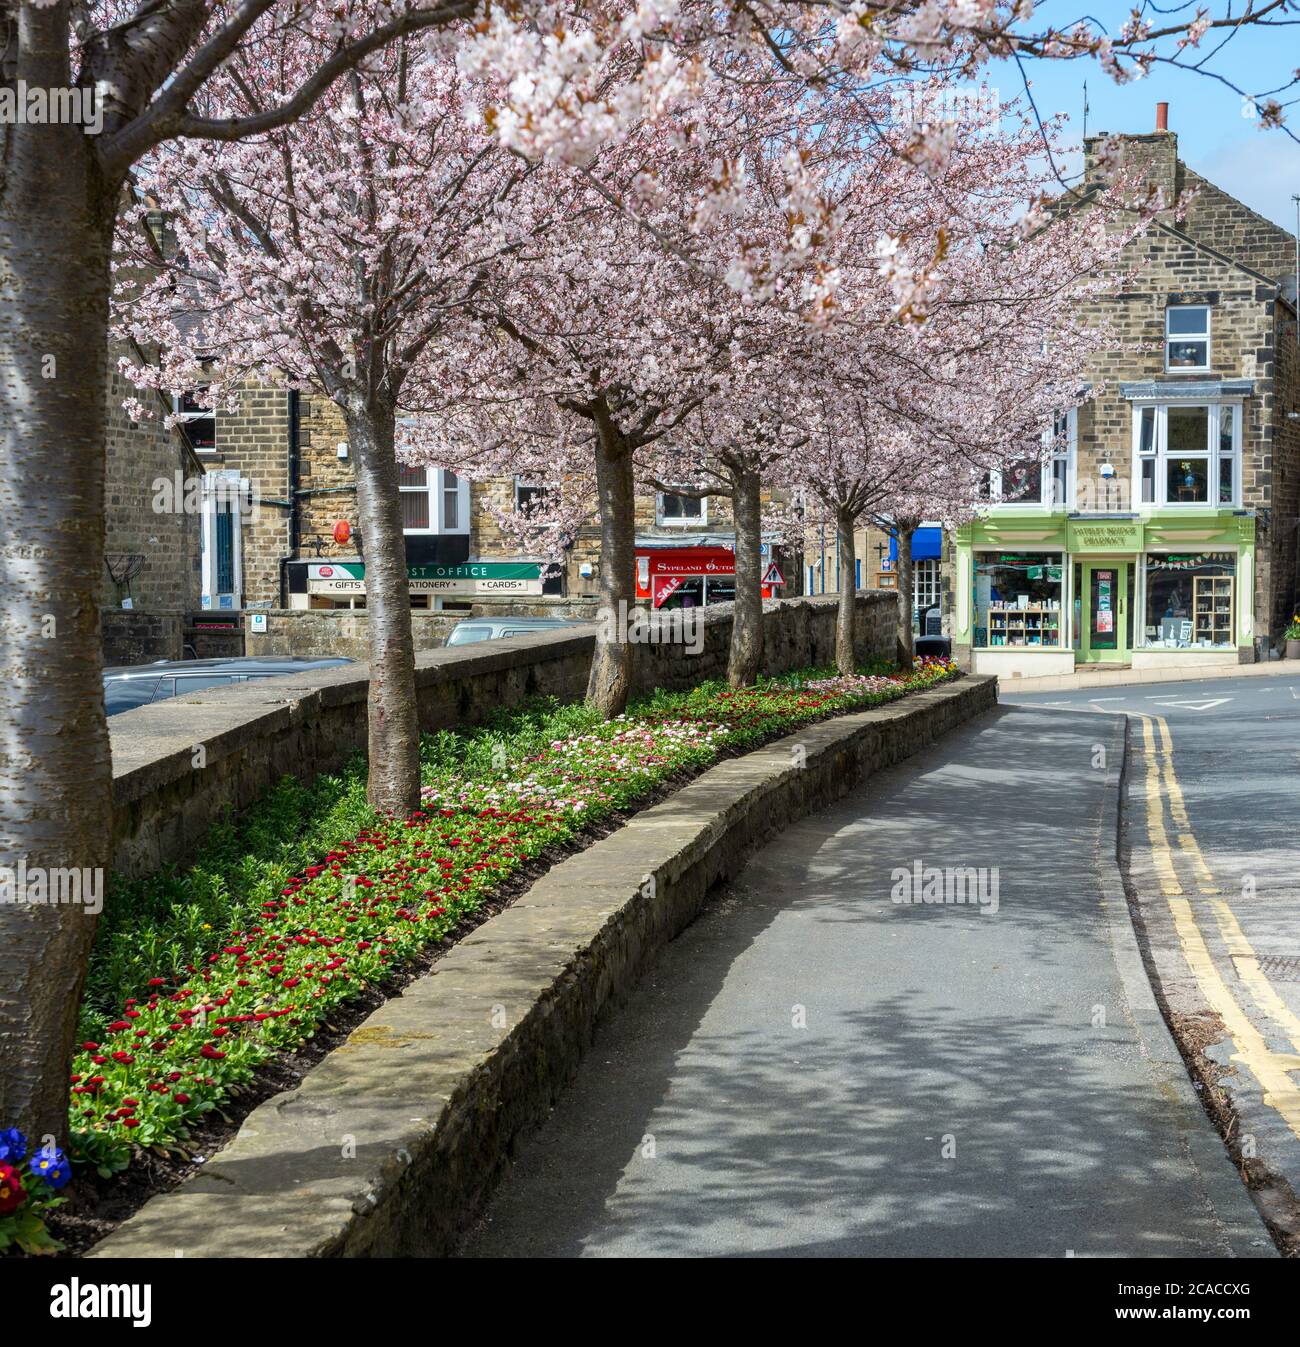 A row of cherry trees with pink blossom in springtime in Pateley Bridge, North Yorkshire Stock Photo